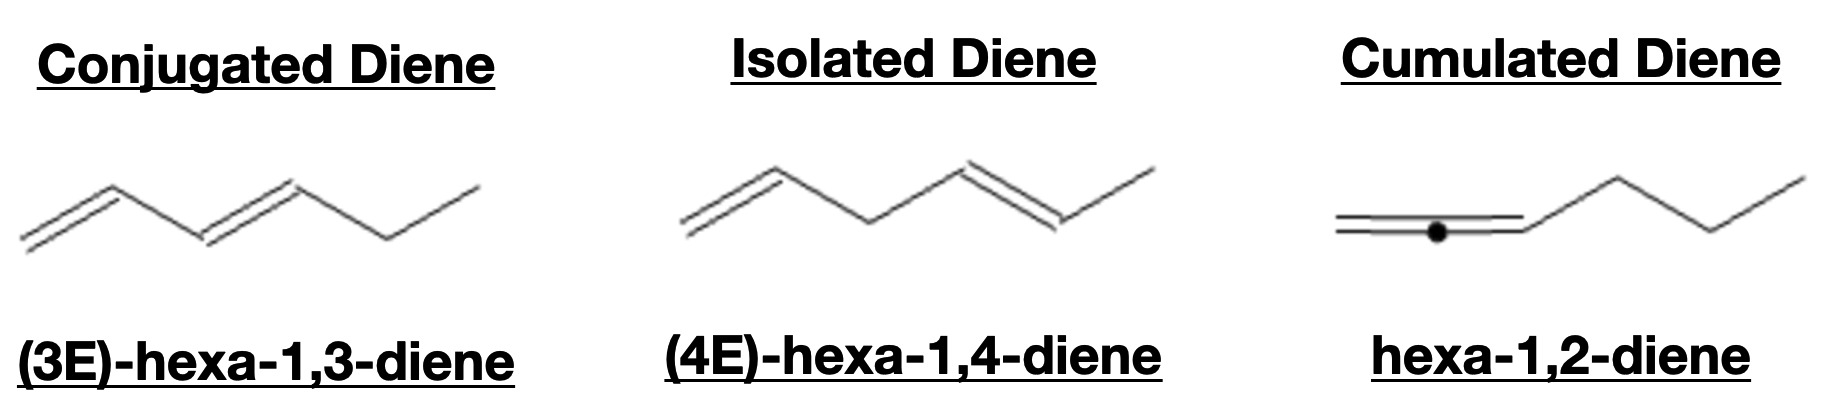 Dienes: Understanding Stability, Resonance Energy, and Kinetic vs Thermodynamic Control - cumulated diene